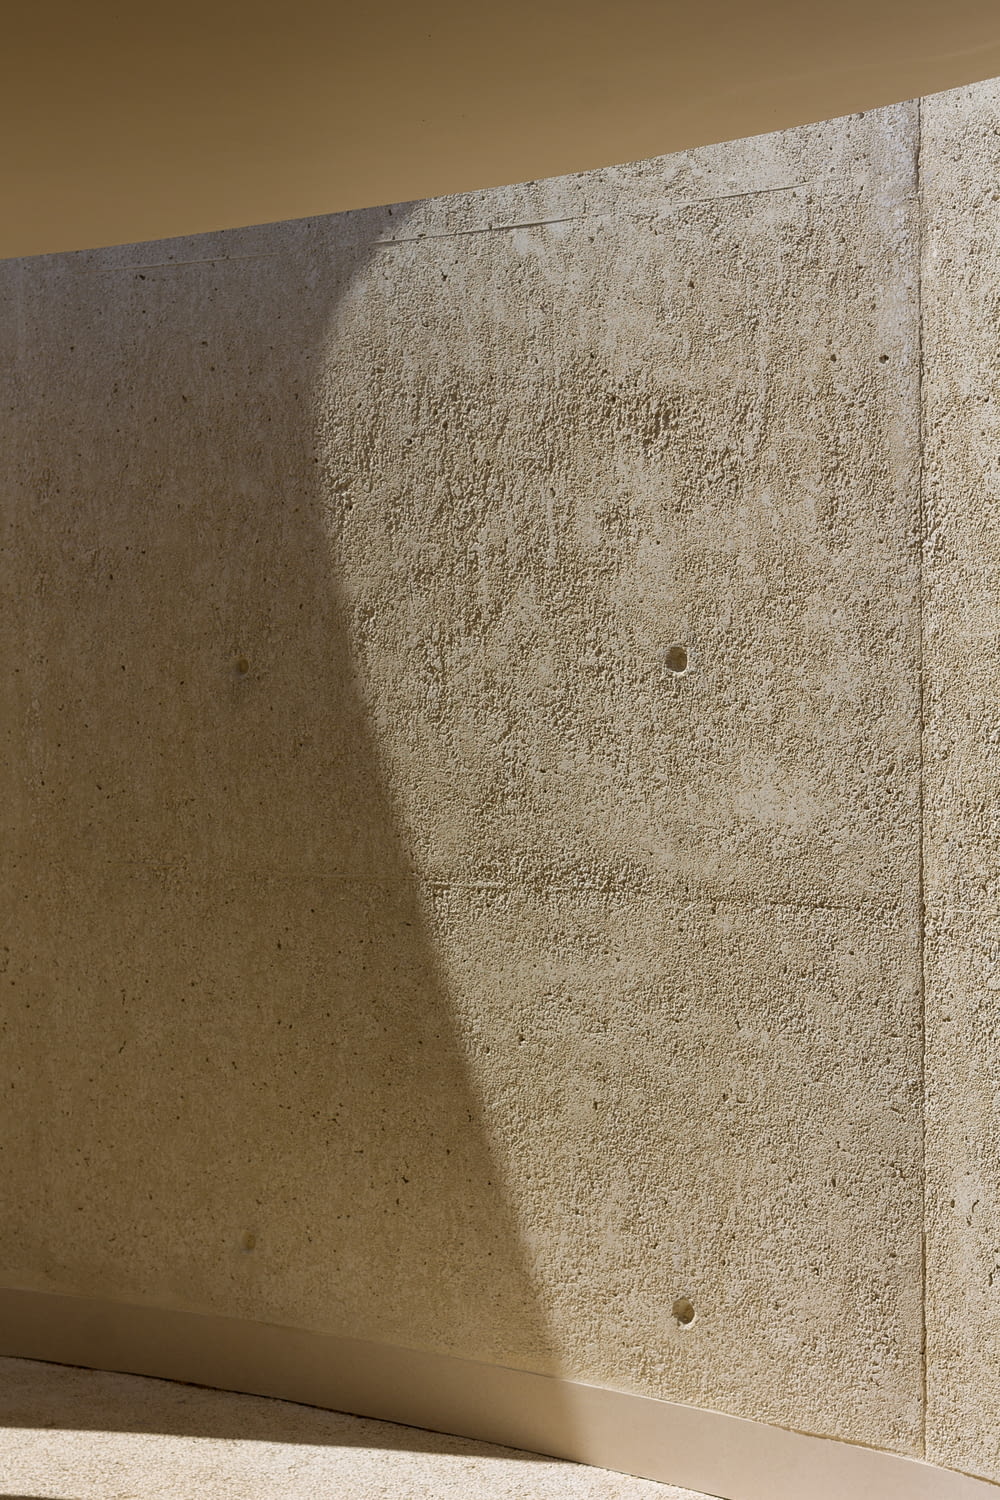 the shadow of a person sitting on a bench